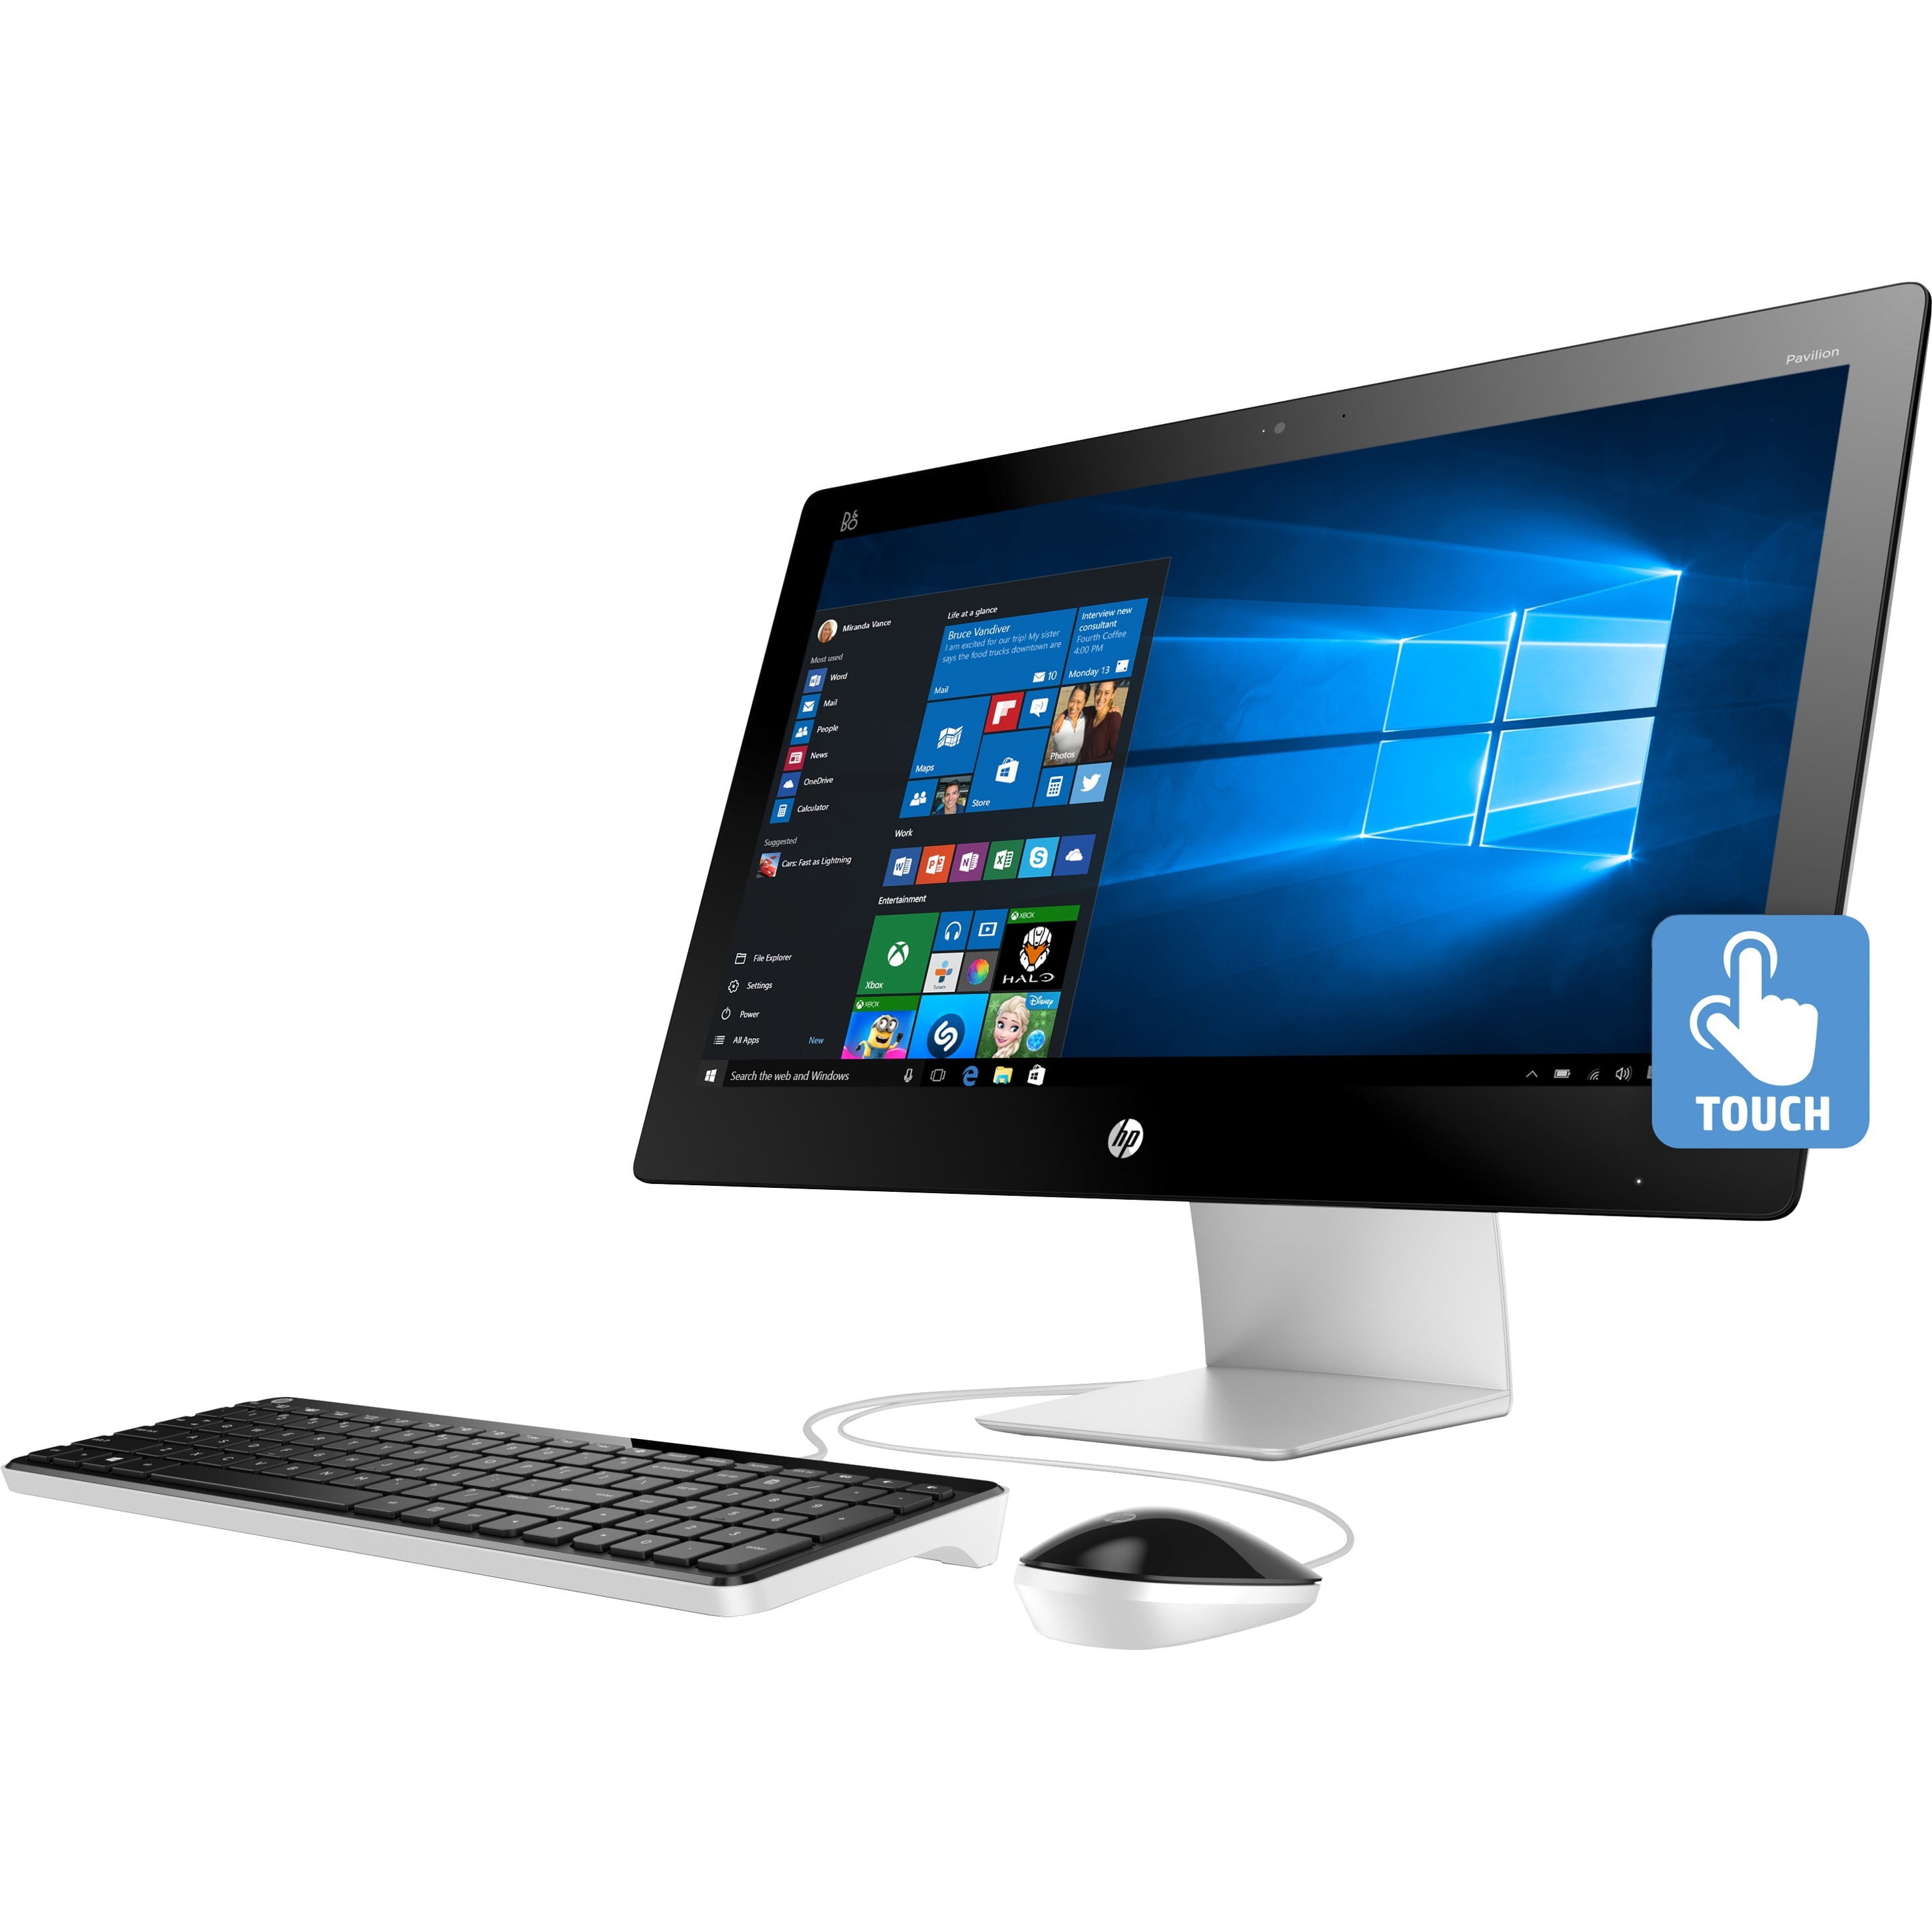 HP Pavilion 23" Full HD Touchscreen All-In-One Computer, AMD A-Series